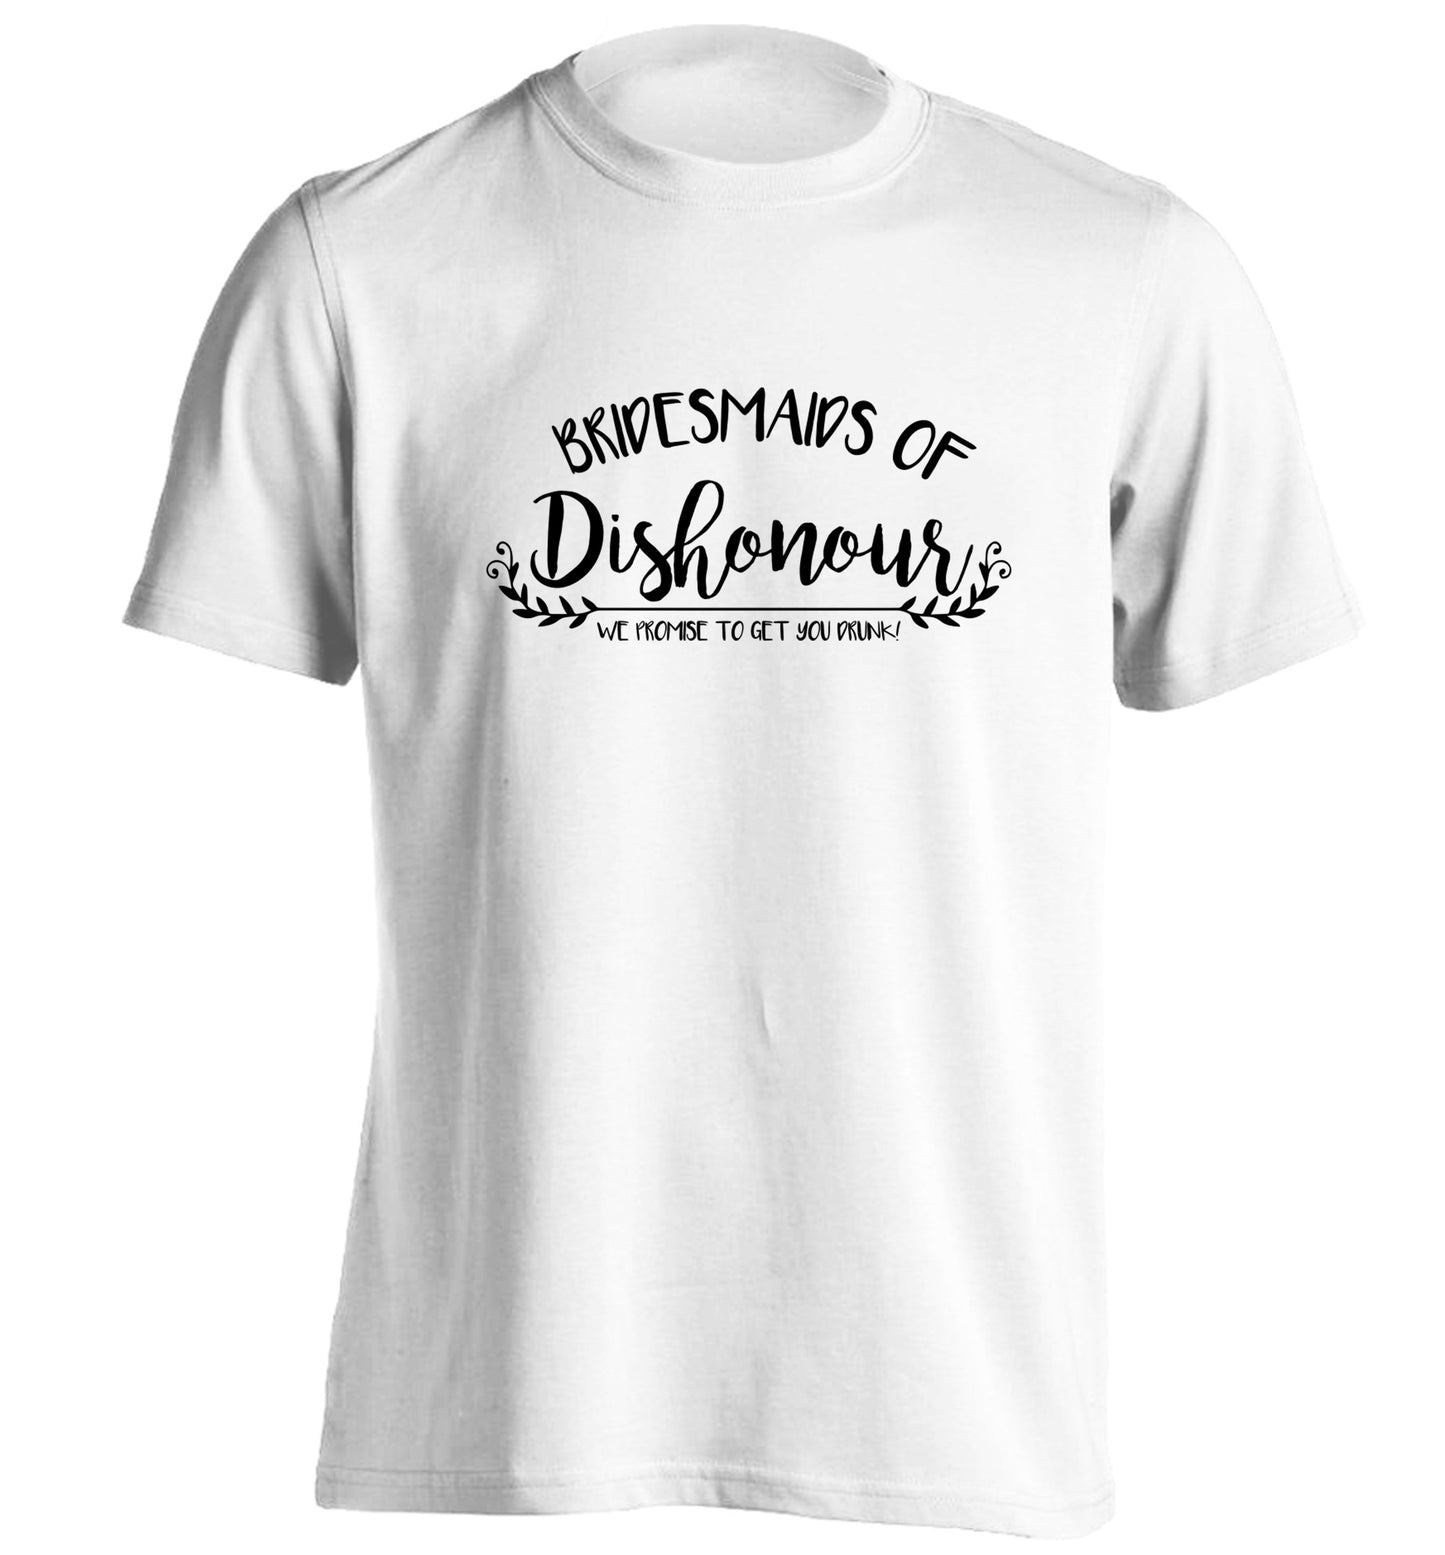 Bridesmaids of Dishonour we promise to get you drunk! adults unisex white Tshirt 2XL